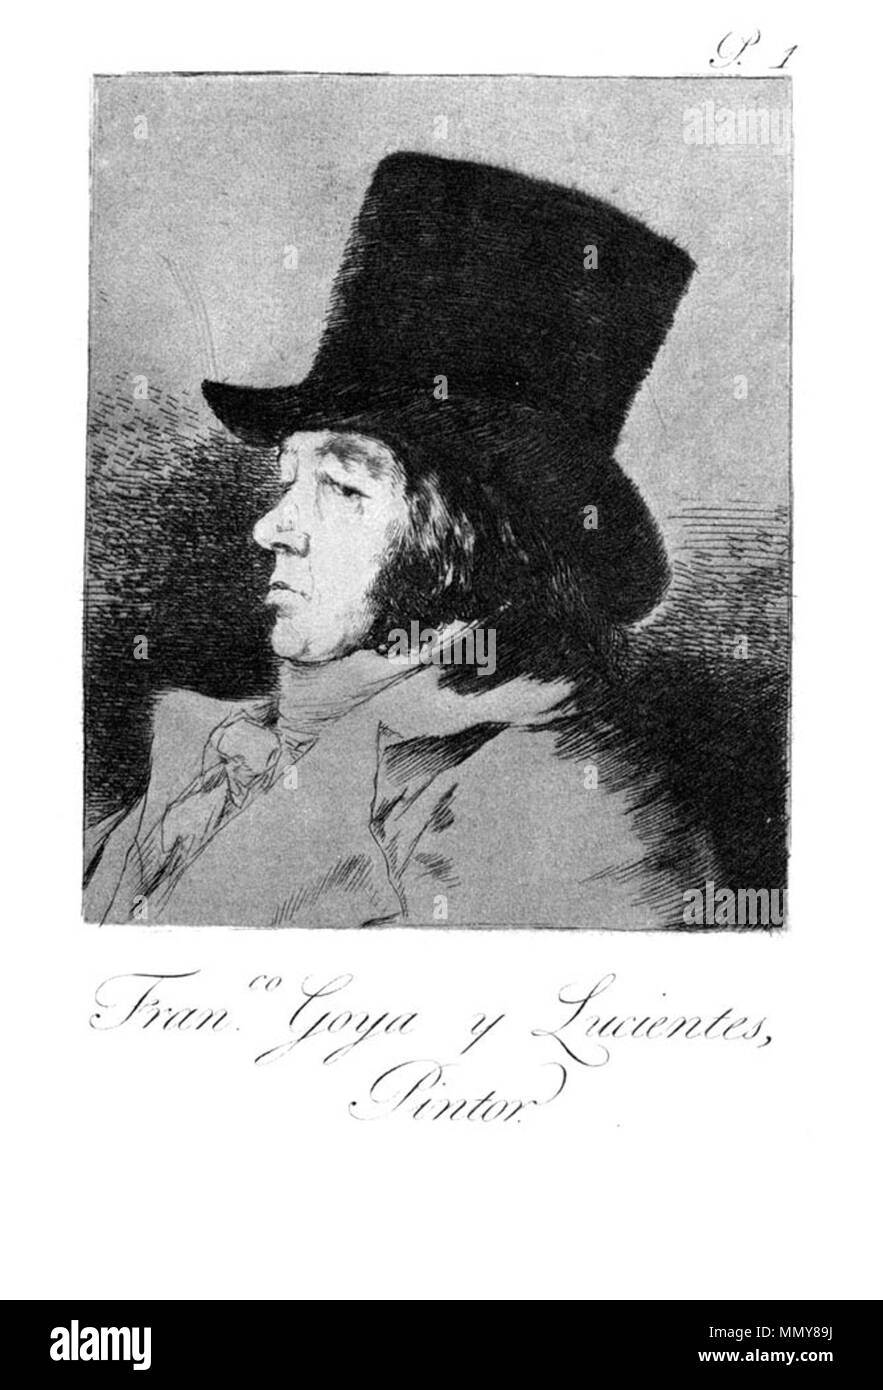 . Los Caprichos is a set of 80 aquatint prints created by Francisco Goya for release in 1799.  Capricho ? 1: Francisco Goya y Lucientes, Pintor. 1799. Goya - Caprichos (01) Stock Photo